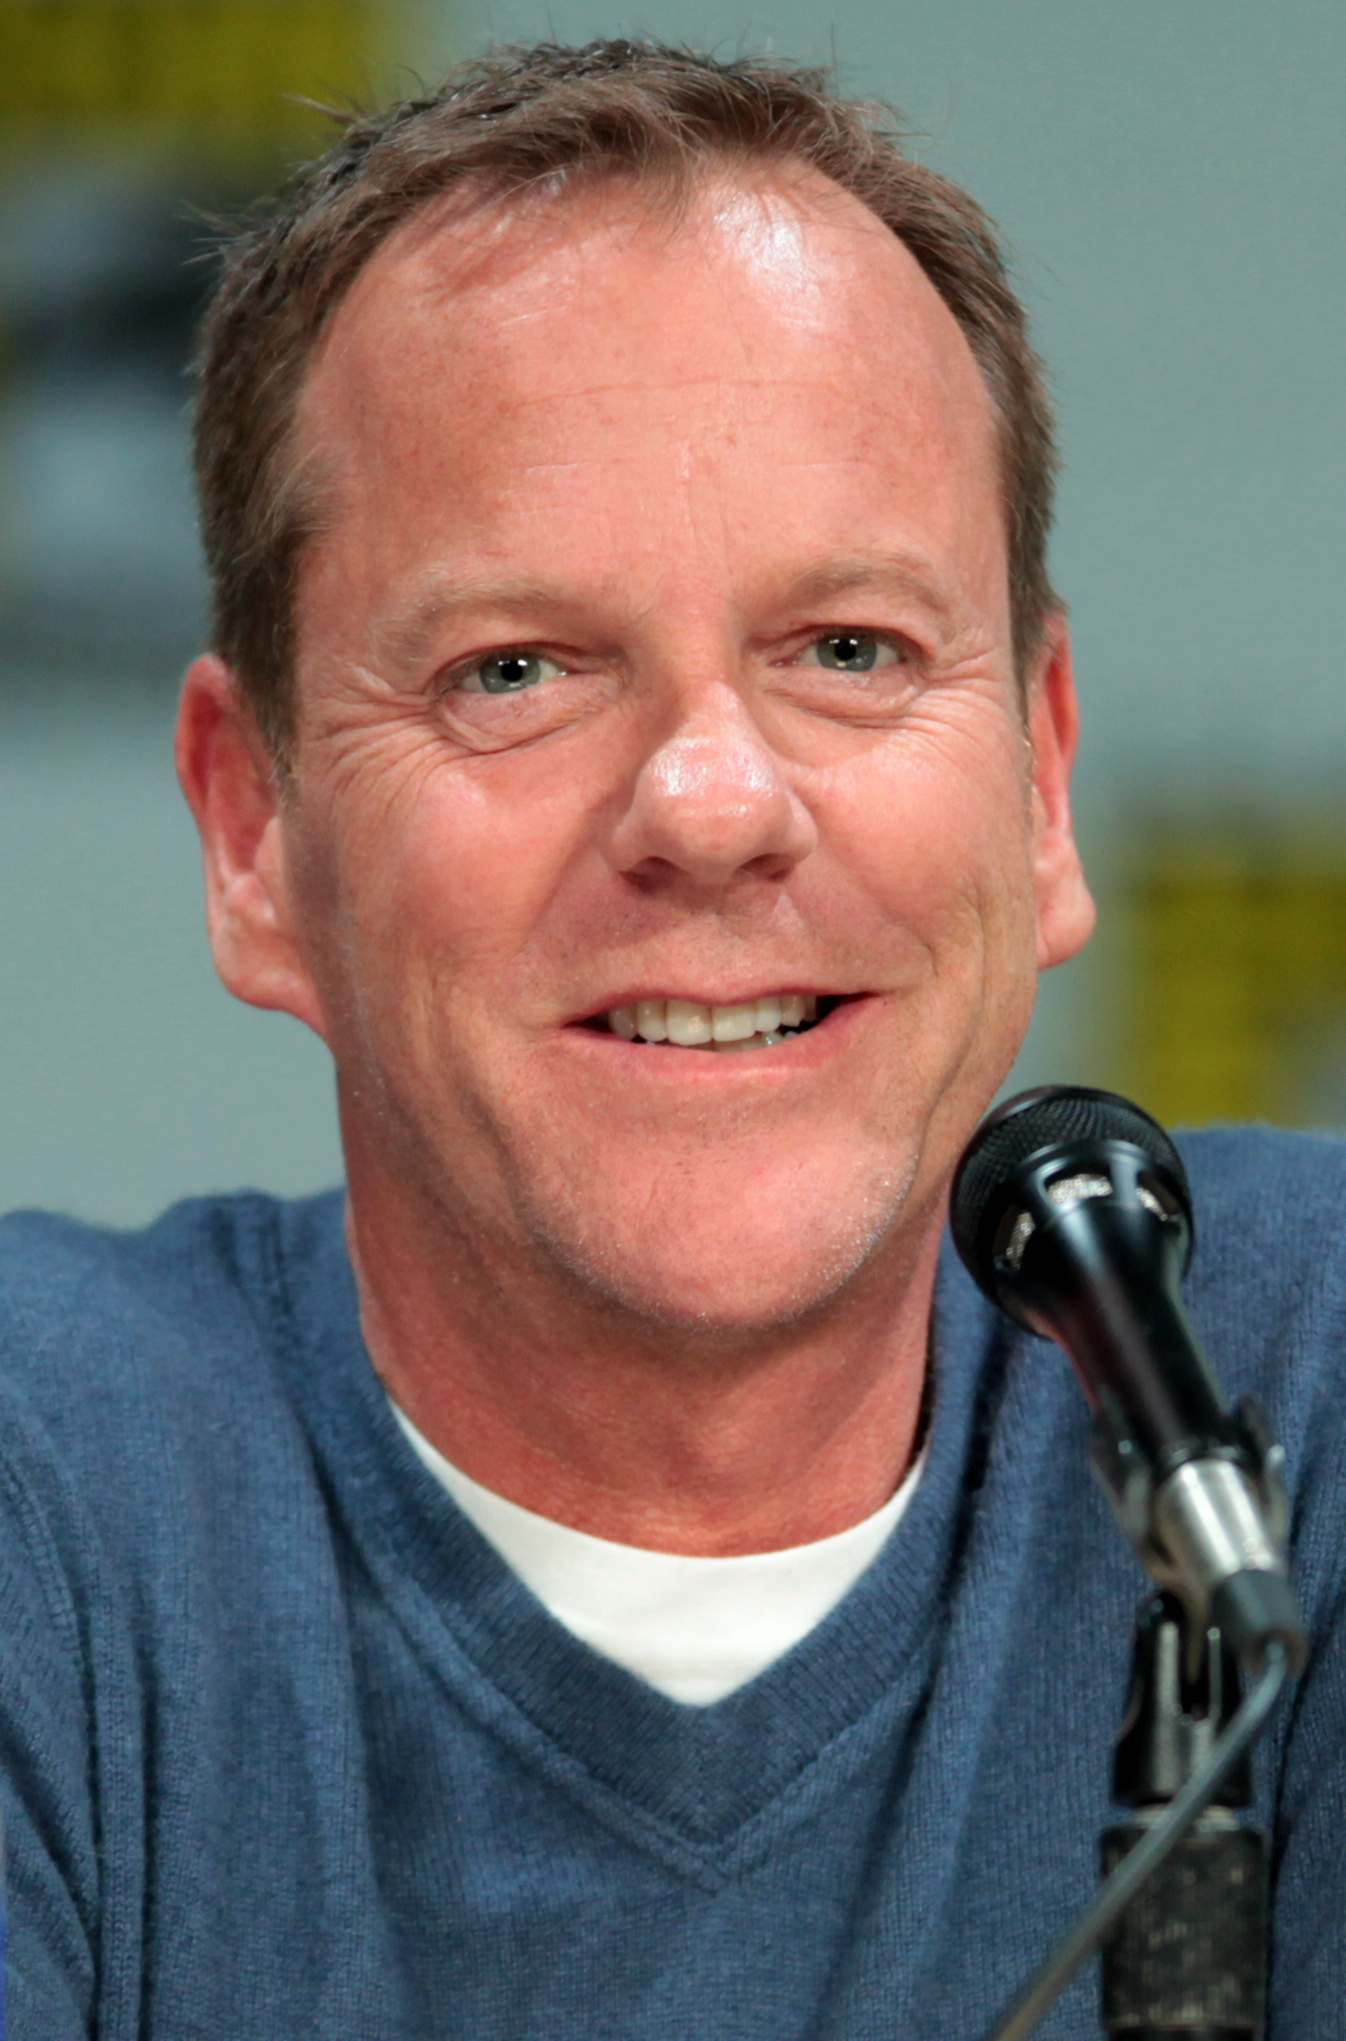 How tall is Kiefer Sutherland?